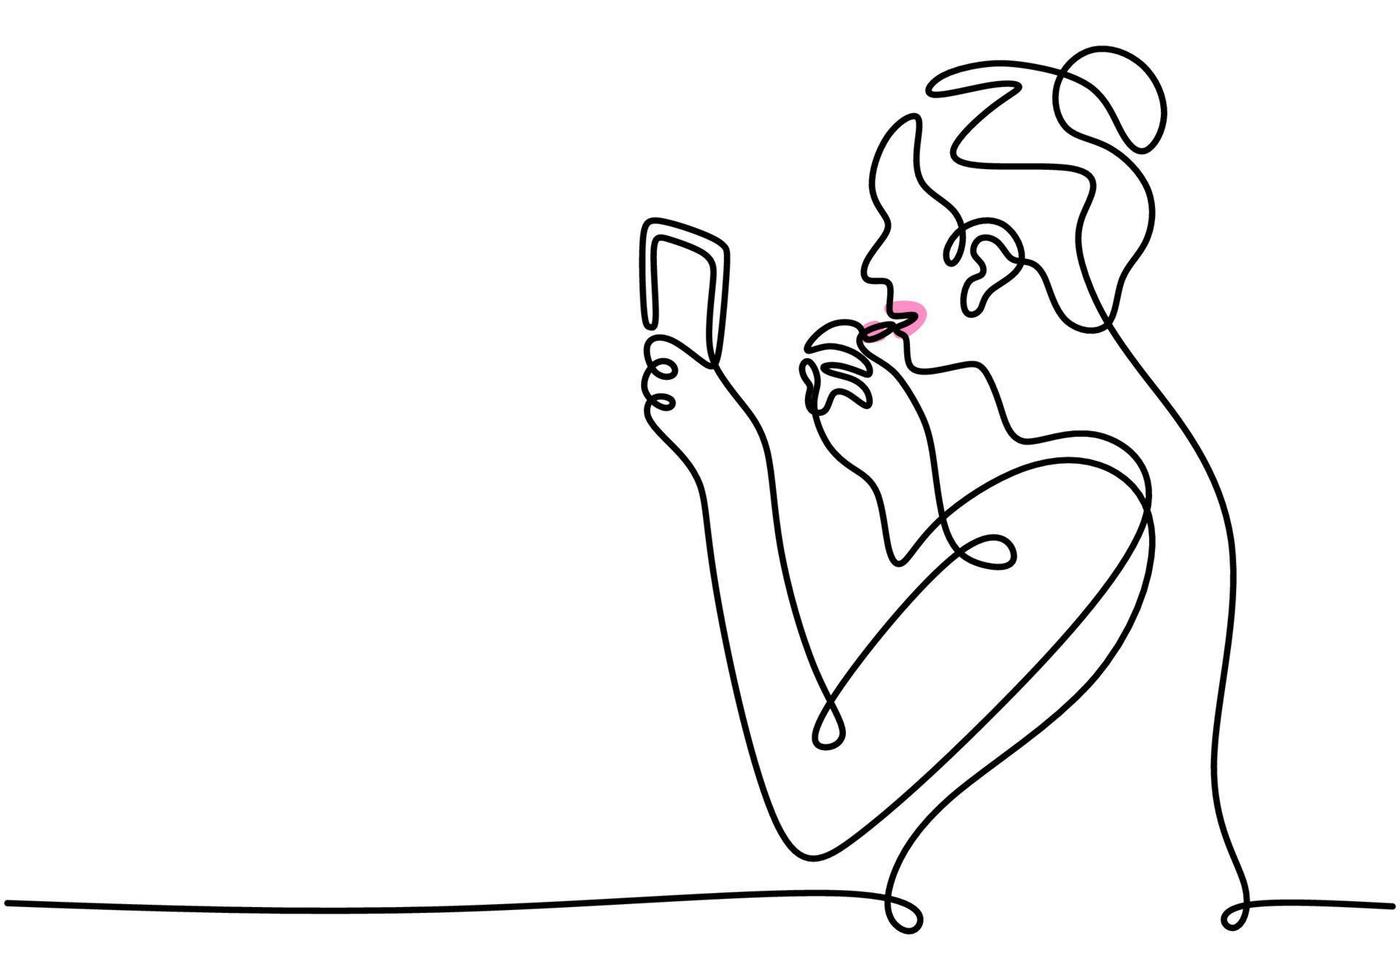 Continuous single line drawing of big woman using lipstick on her lips vector